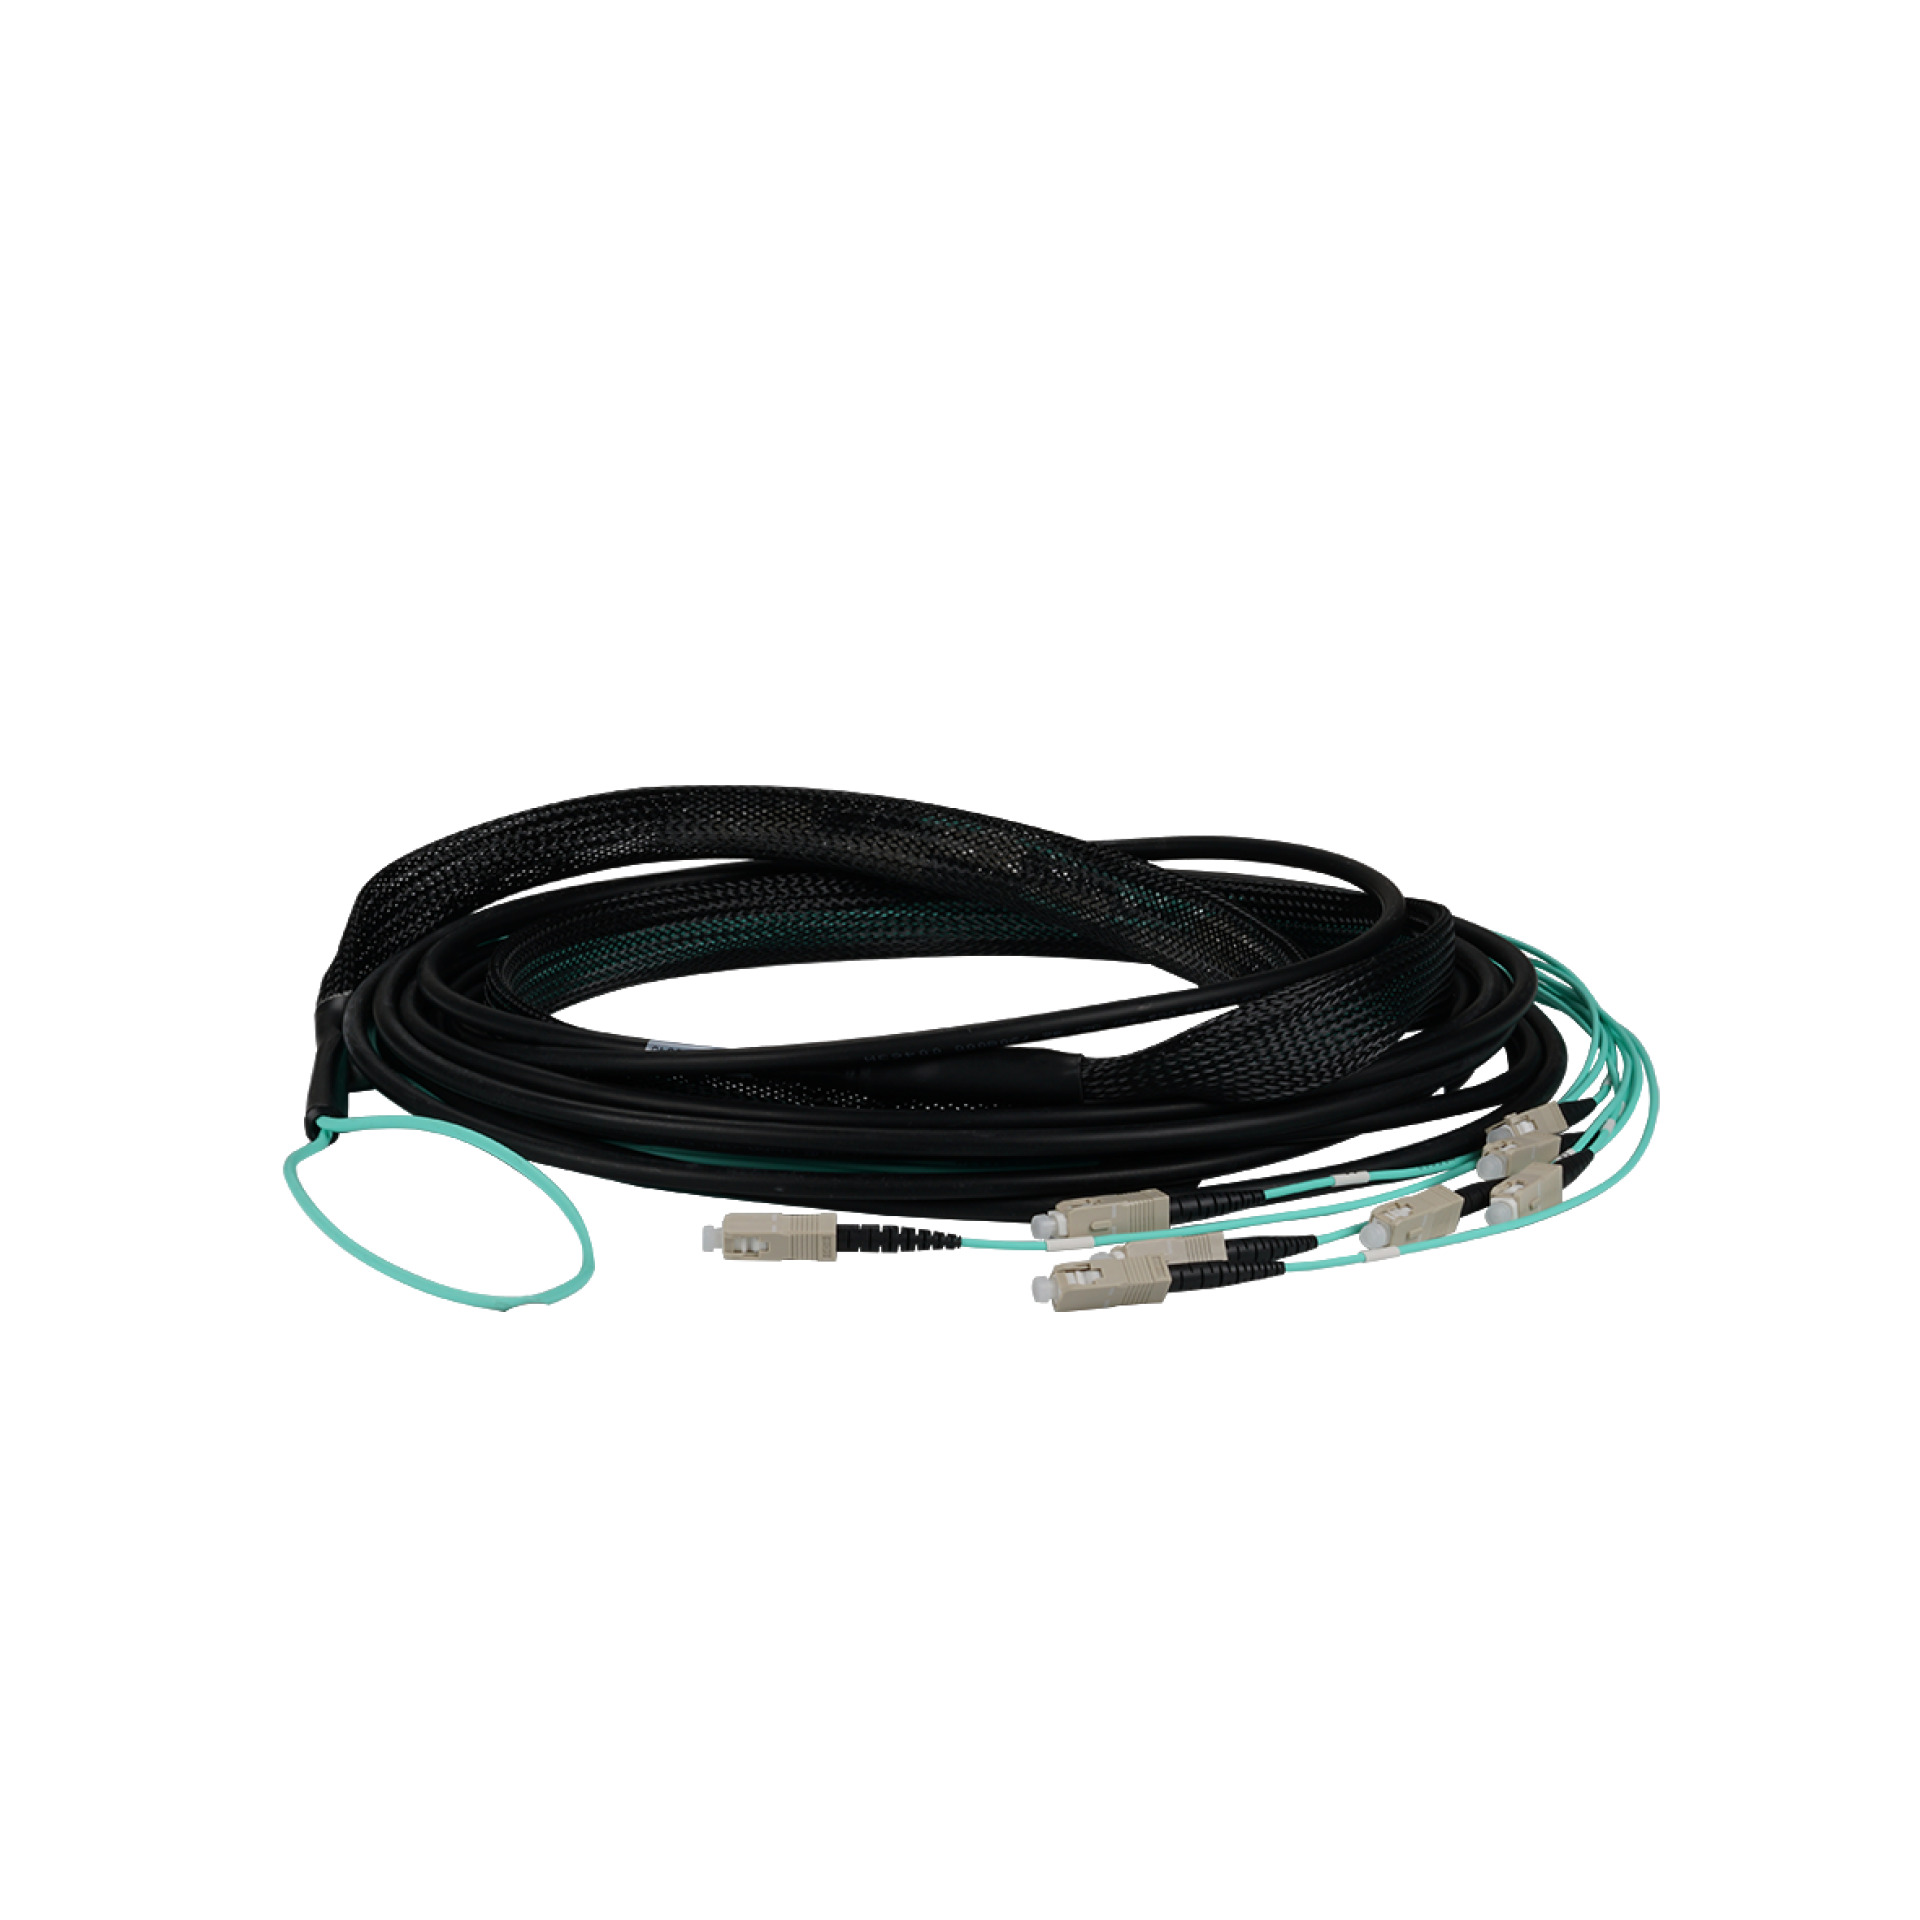 Trunk cable U-DQ(ZN)BH 8G 50/125, SC/SC OM3 180m